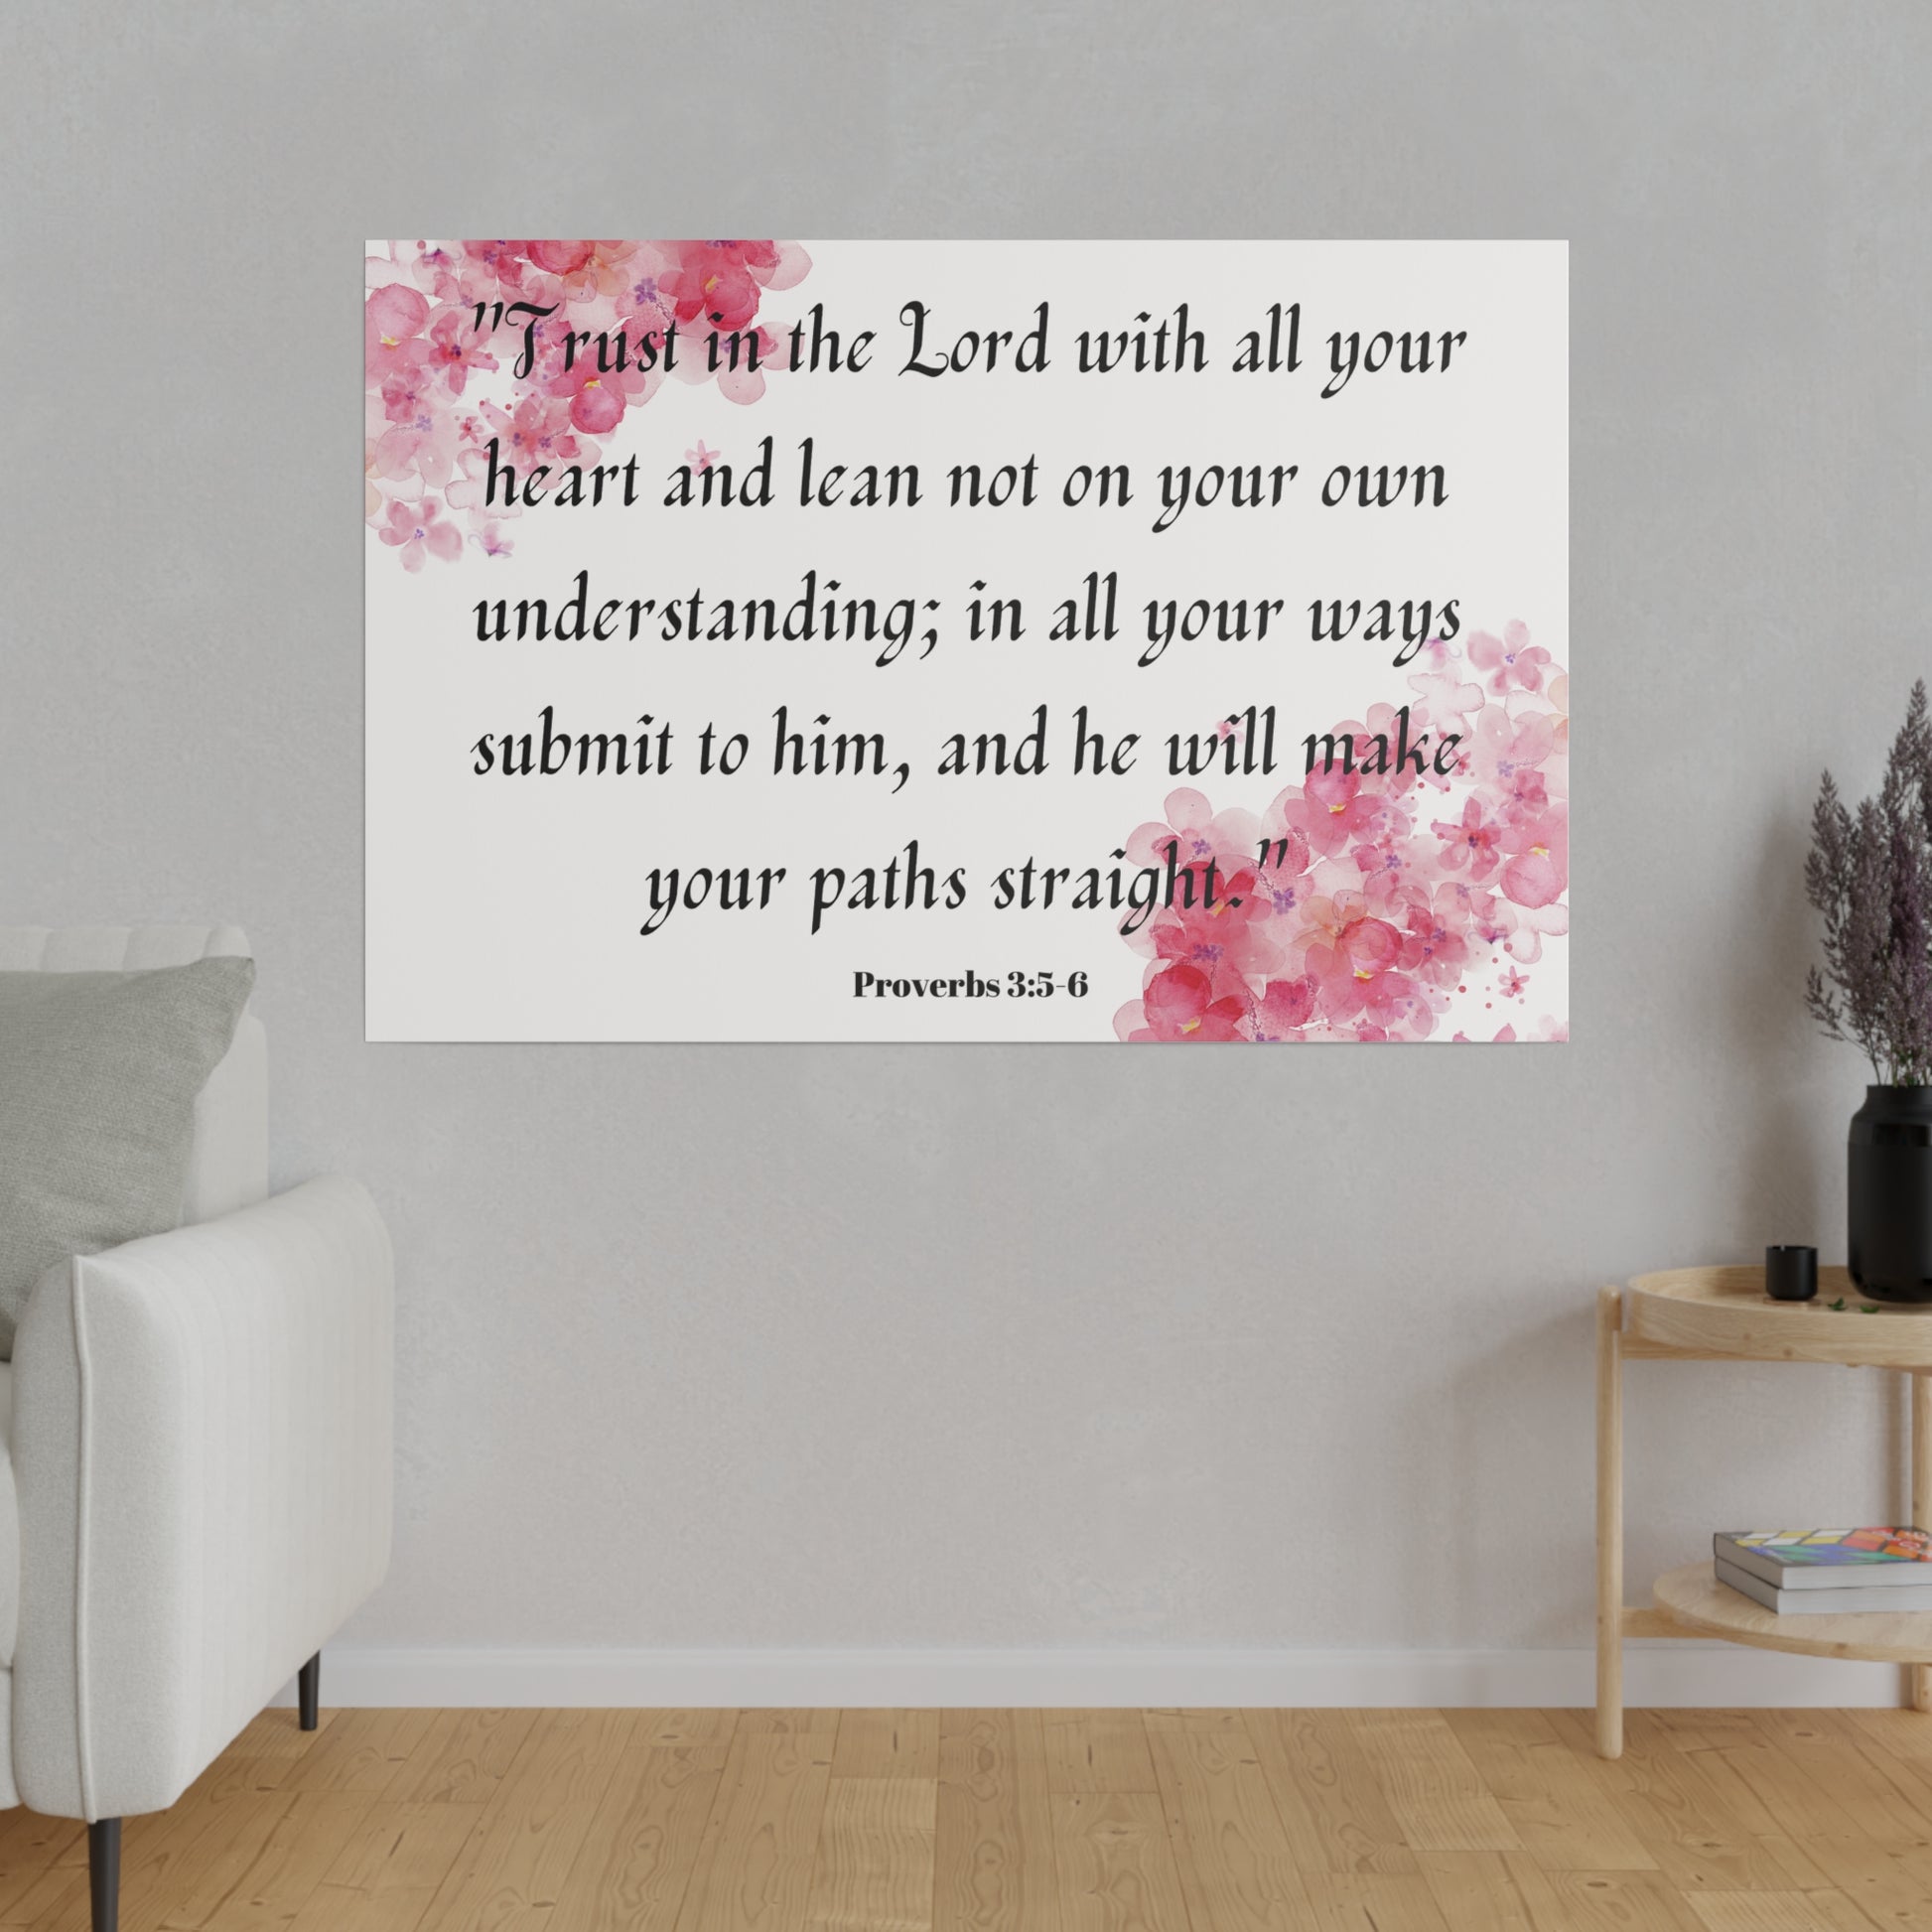 Abstract Canvas Wall Art: Eco-Friendly, Vibrant Prints with Scripture Verse | Art & Wall Decor,Canvas,Decor,Eco-friendly,Hanging Hardware,Holiday Picks,Home & Living,Indoor,Matte,Seasonal Picks,Sustainable,Wall,Wood